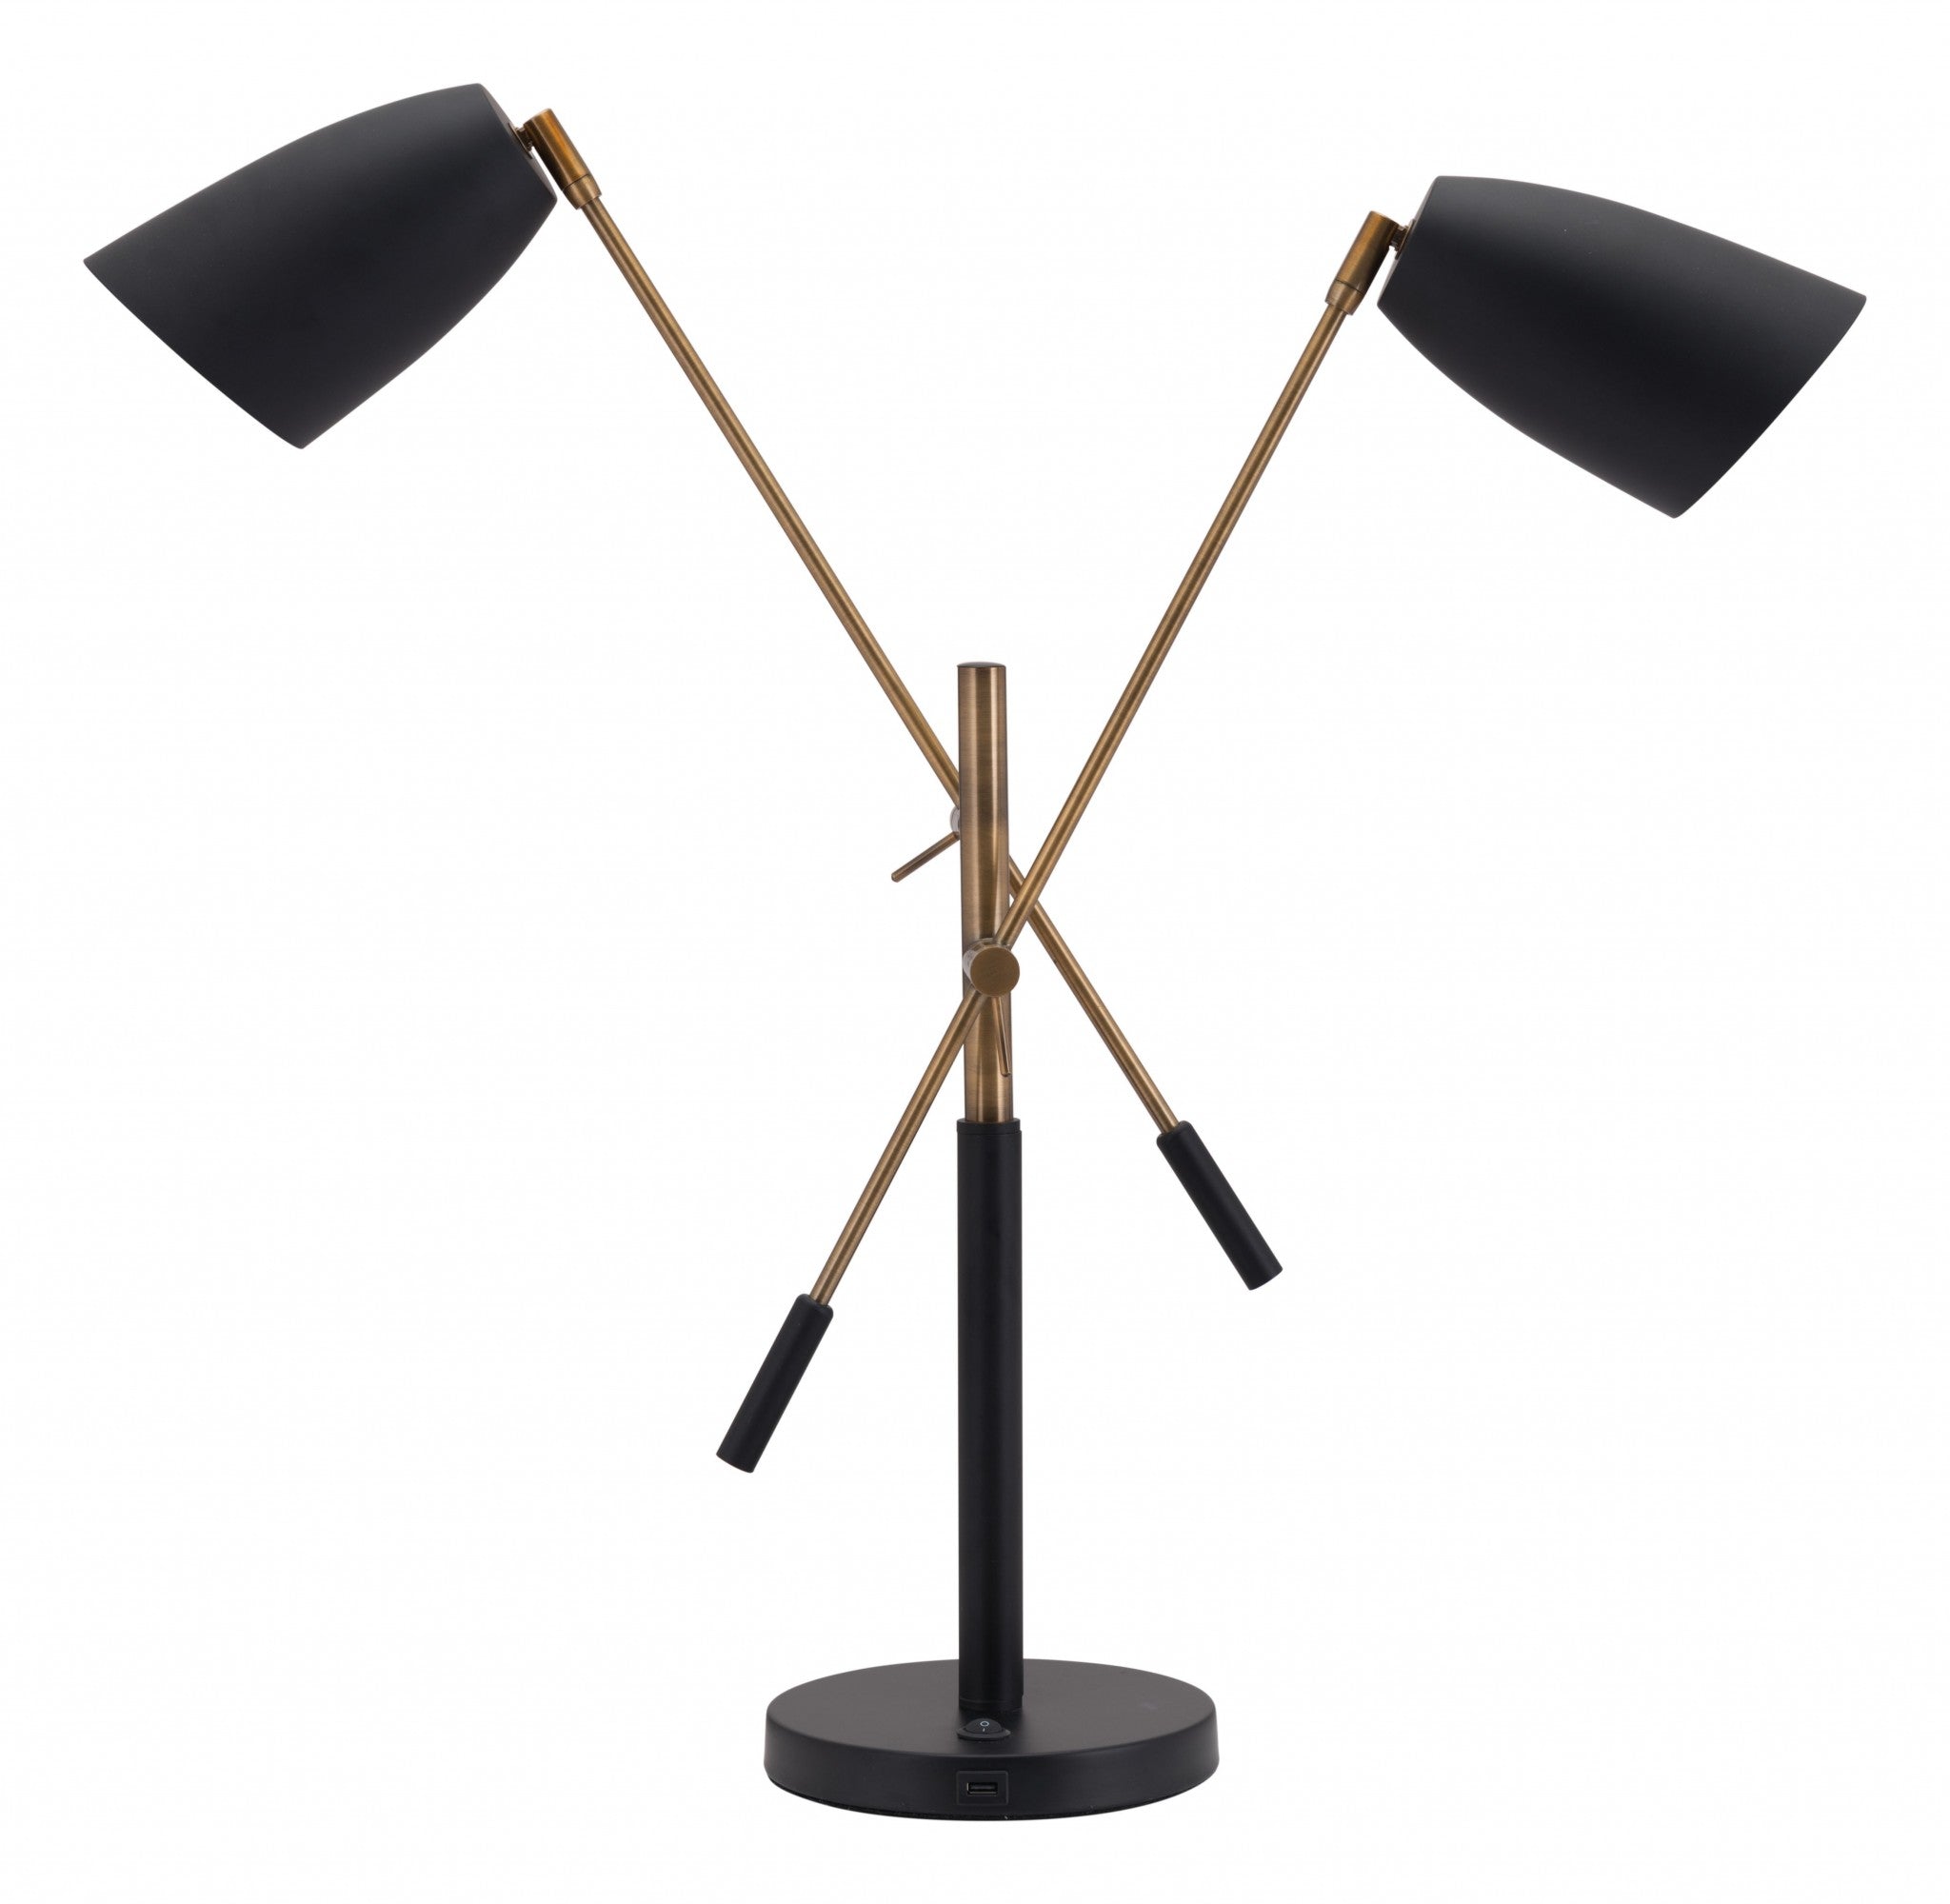 28" Black and Gold Adjustable Table or Desk Lamp